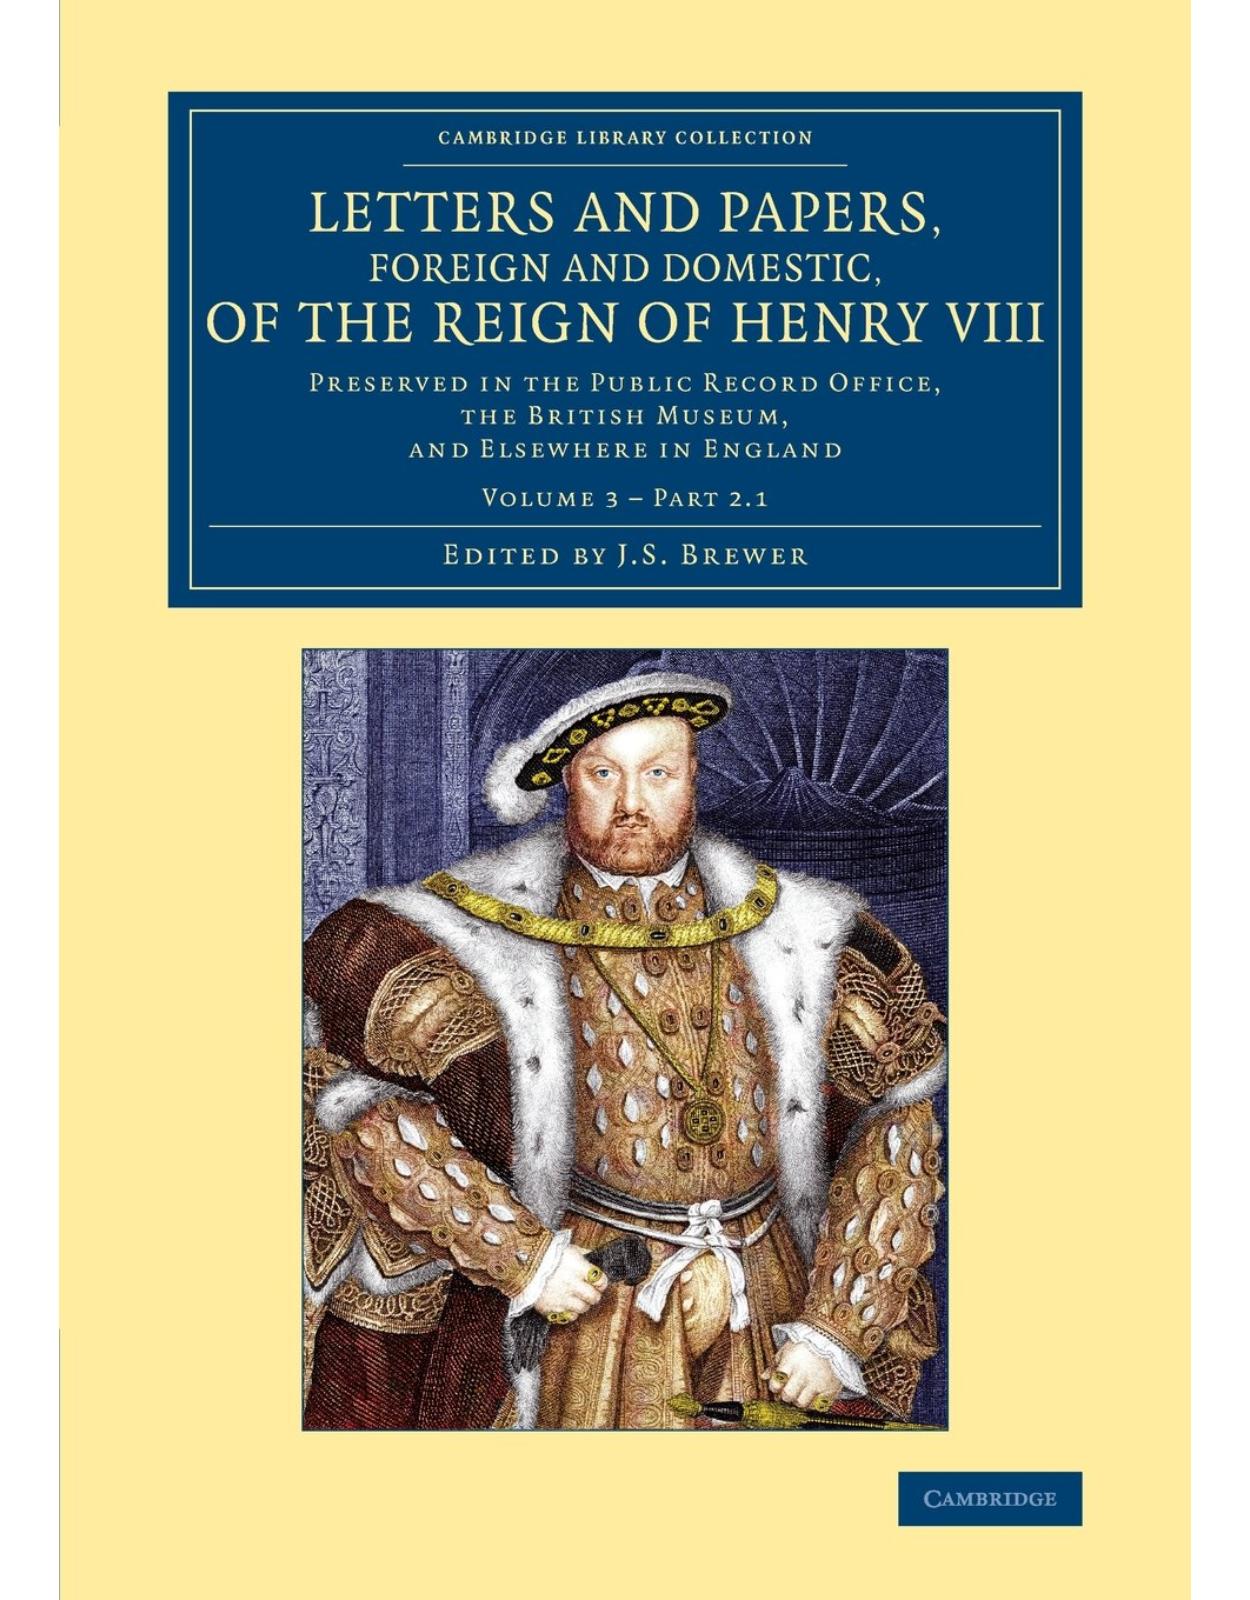 Letters and Papers, Foreign and Domestic, of the Reign of Henry VIII: Volume 3, Part 2.1: Preserved in the Public Record Office, the British Museum, ... and Irish History, 15th & 16th Centuries)